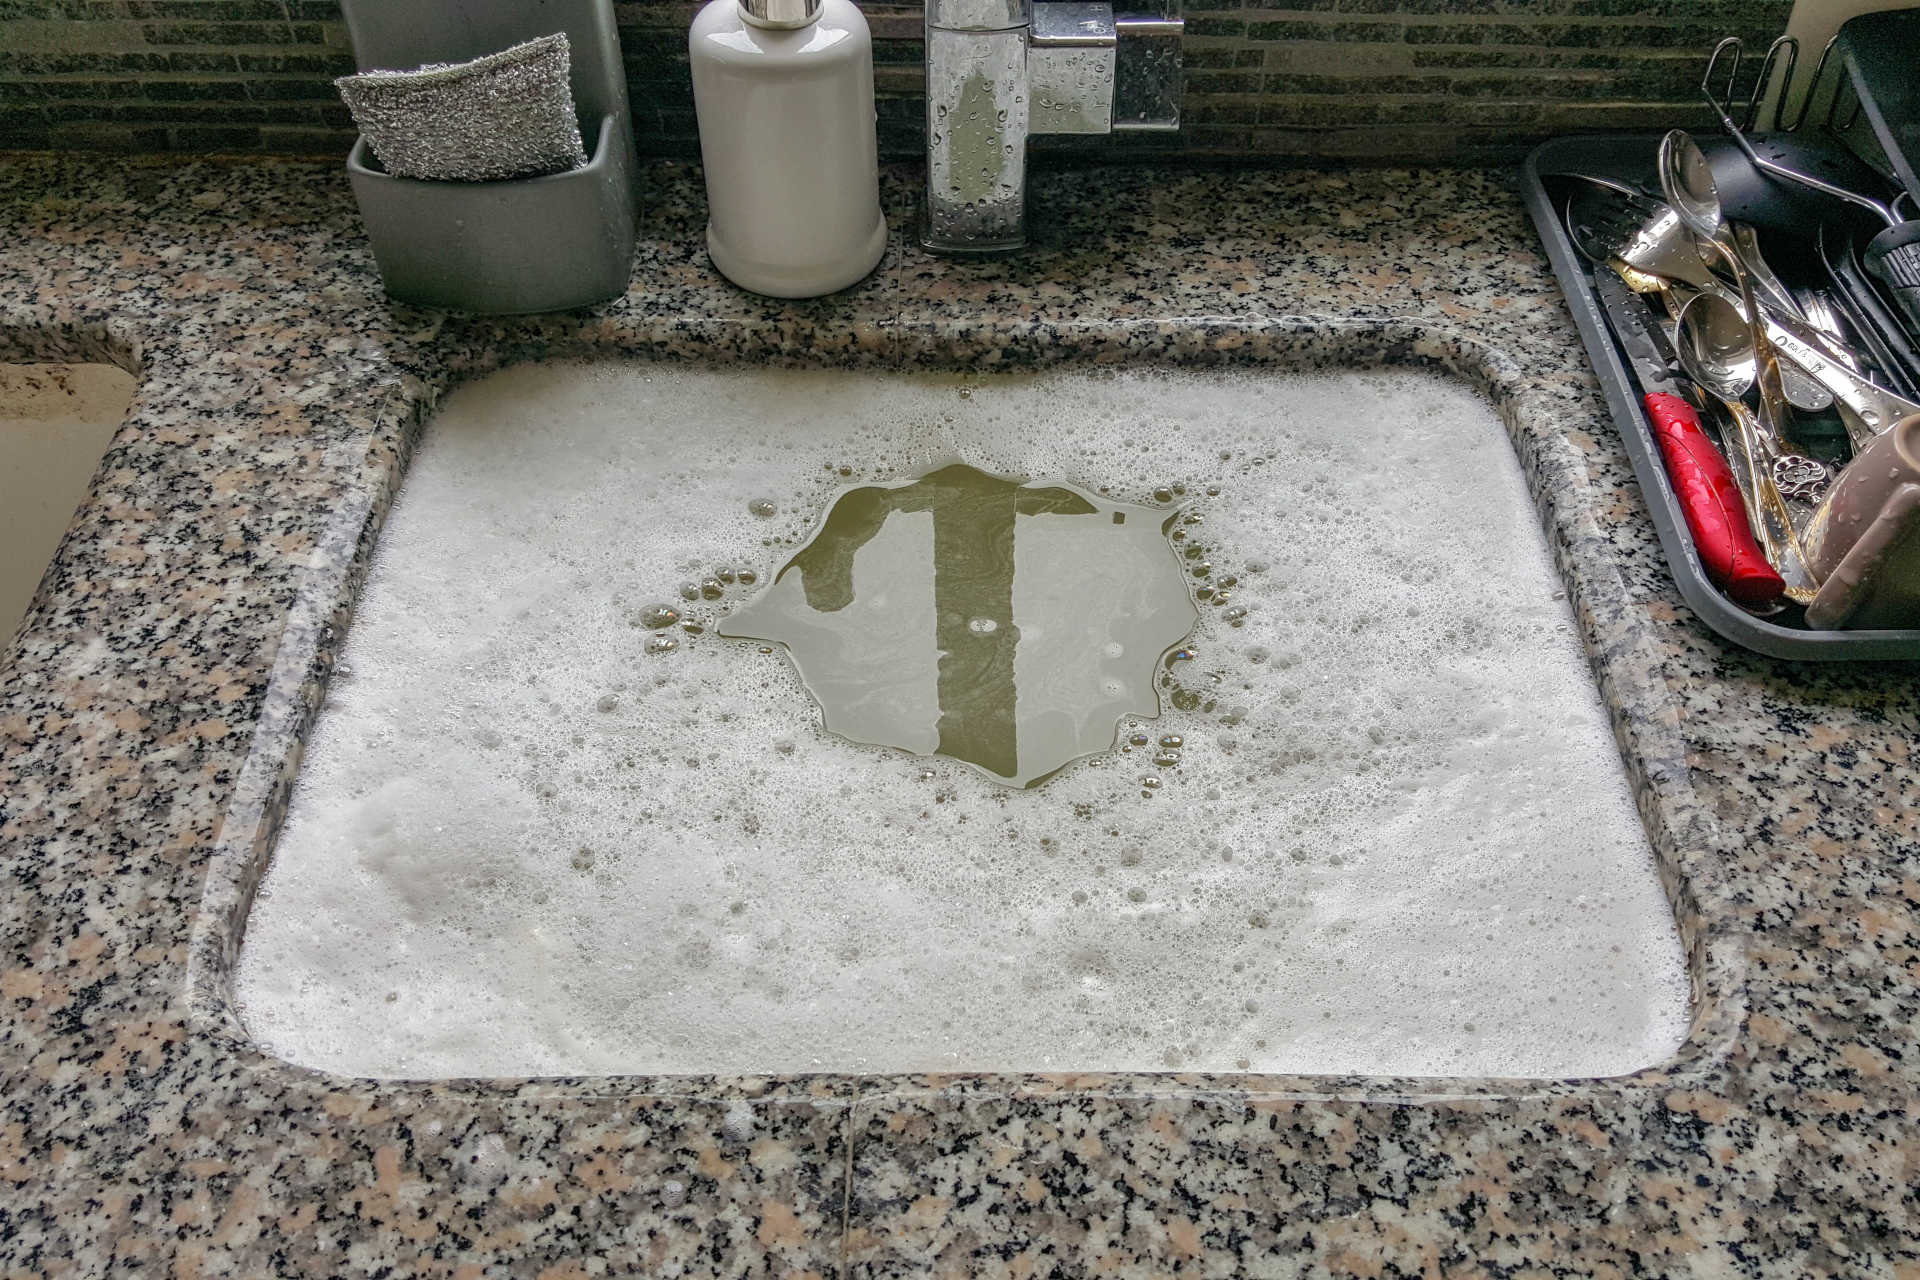 Kitchen sink with blocked drain, full of dirty dishwater.